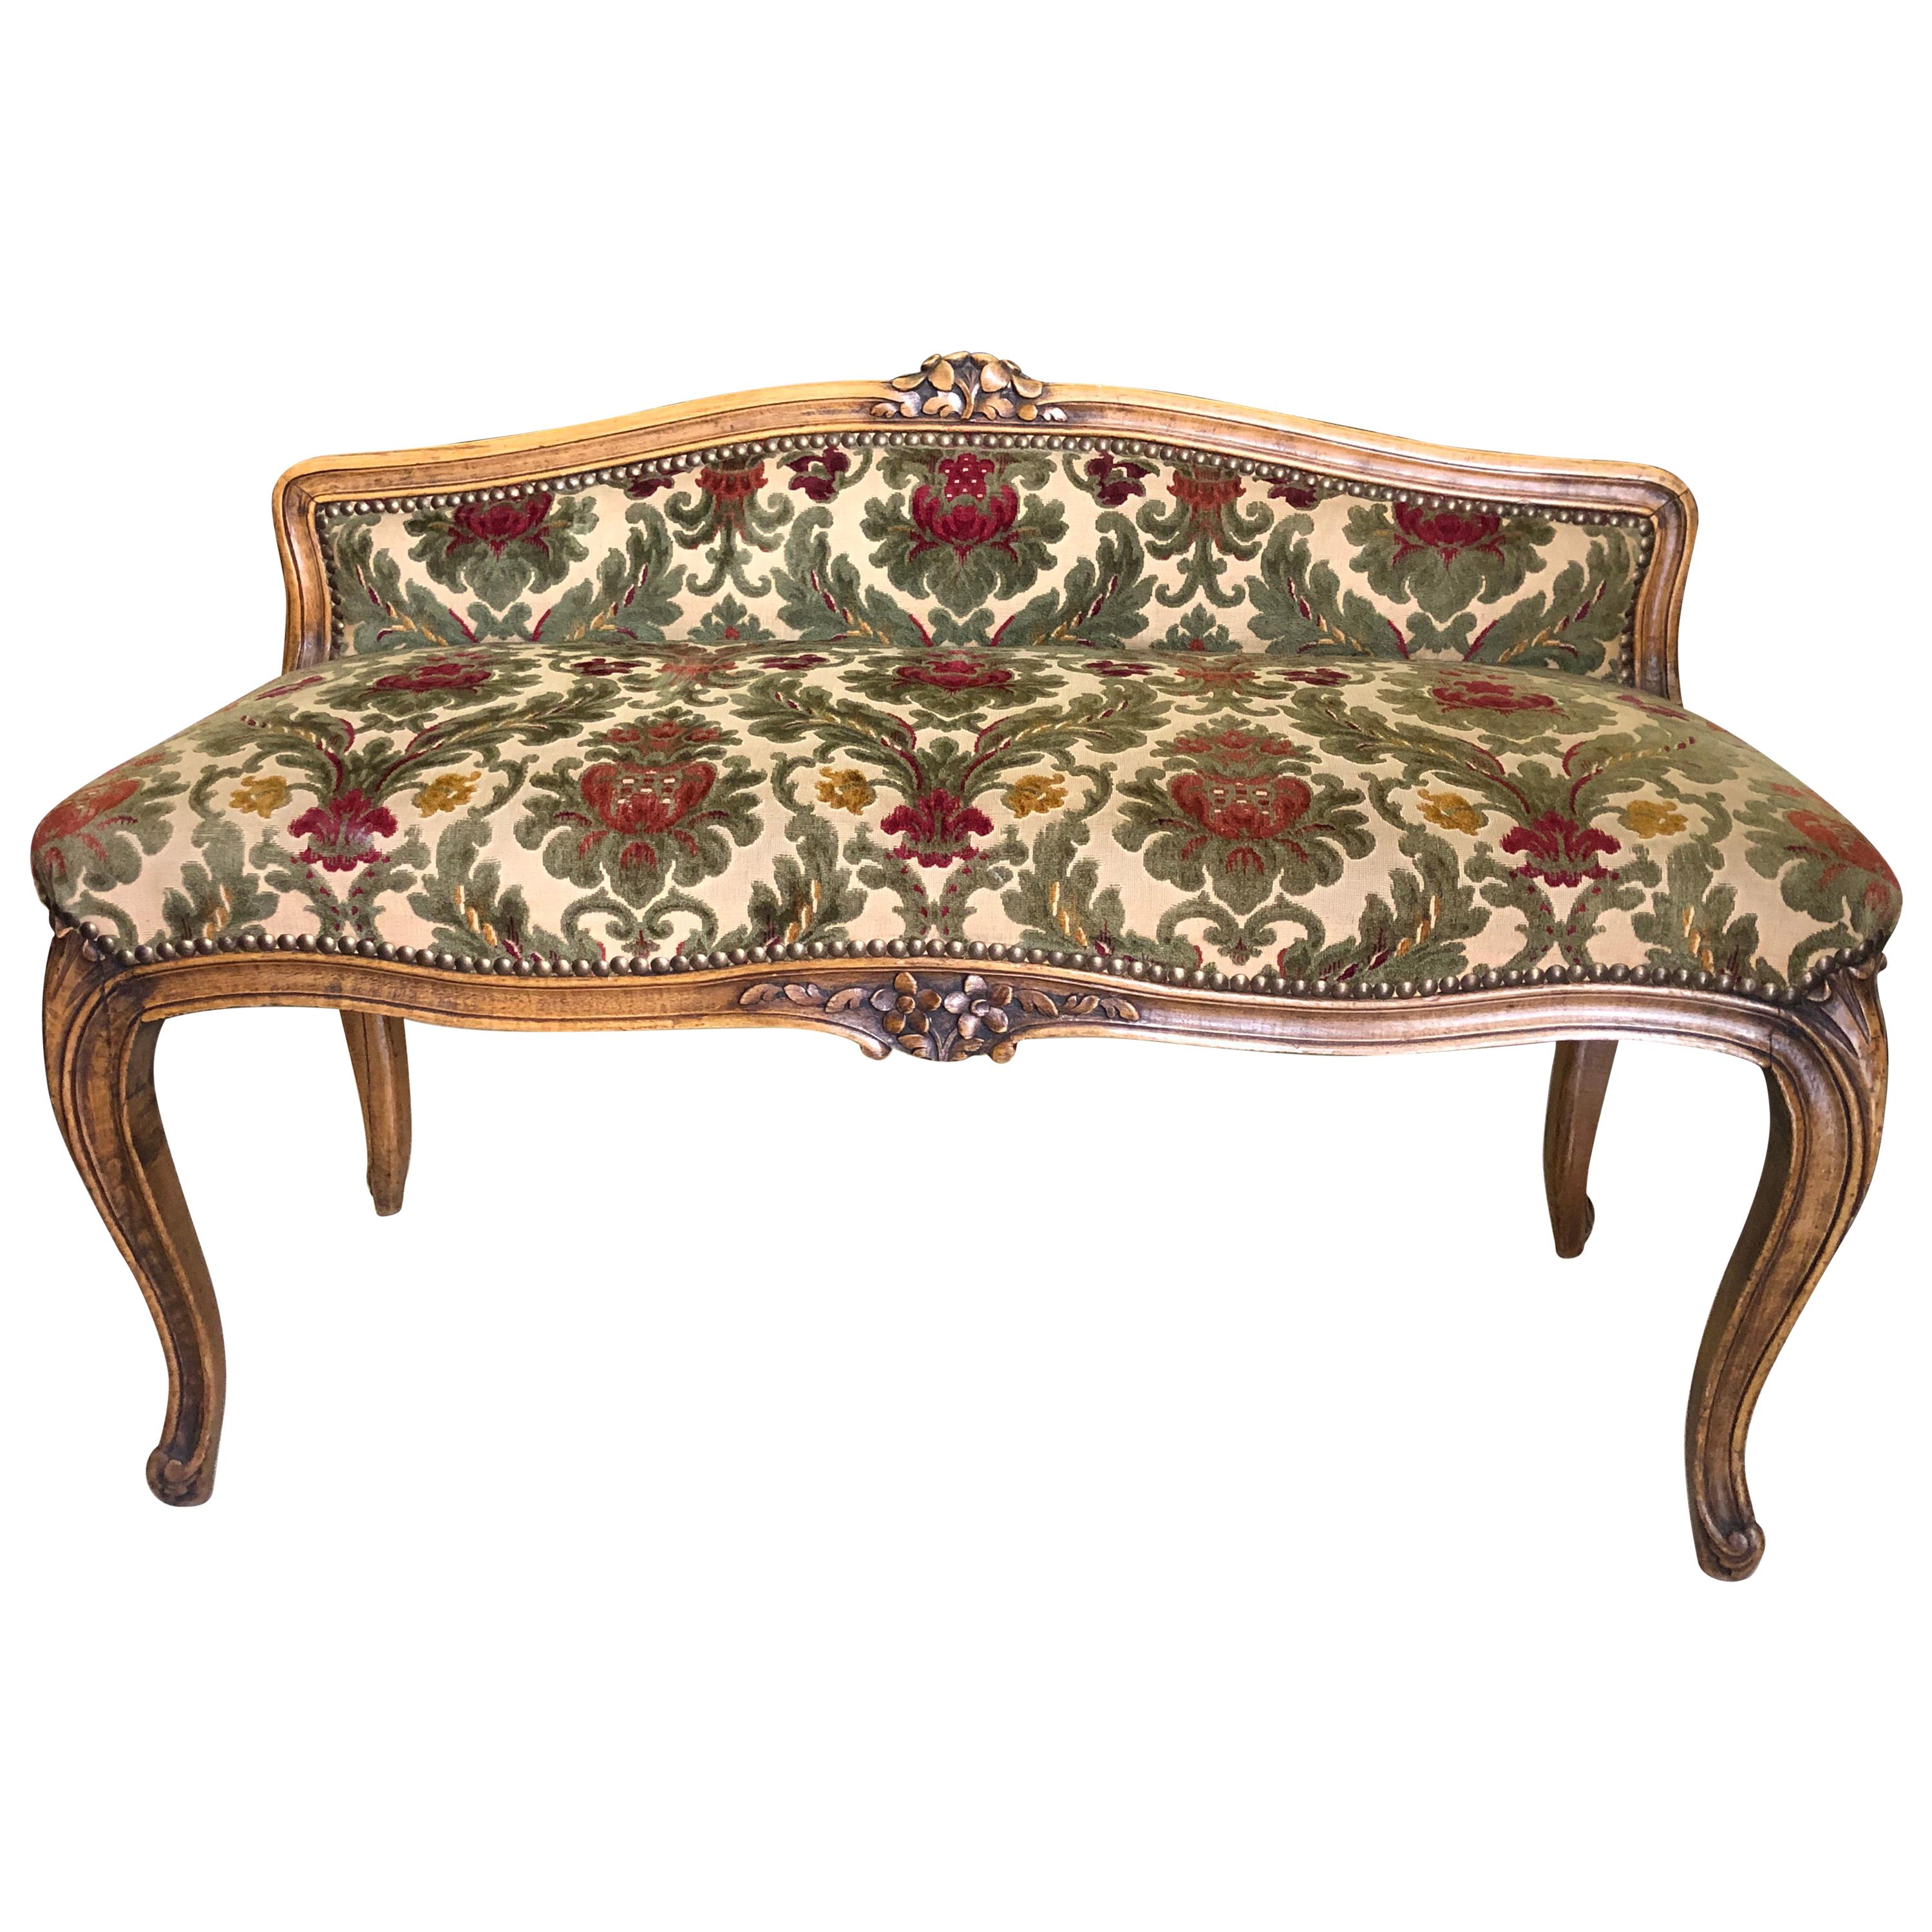 Early 20th Century French Louis XV Style Two-Seated Piano Bench